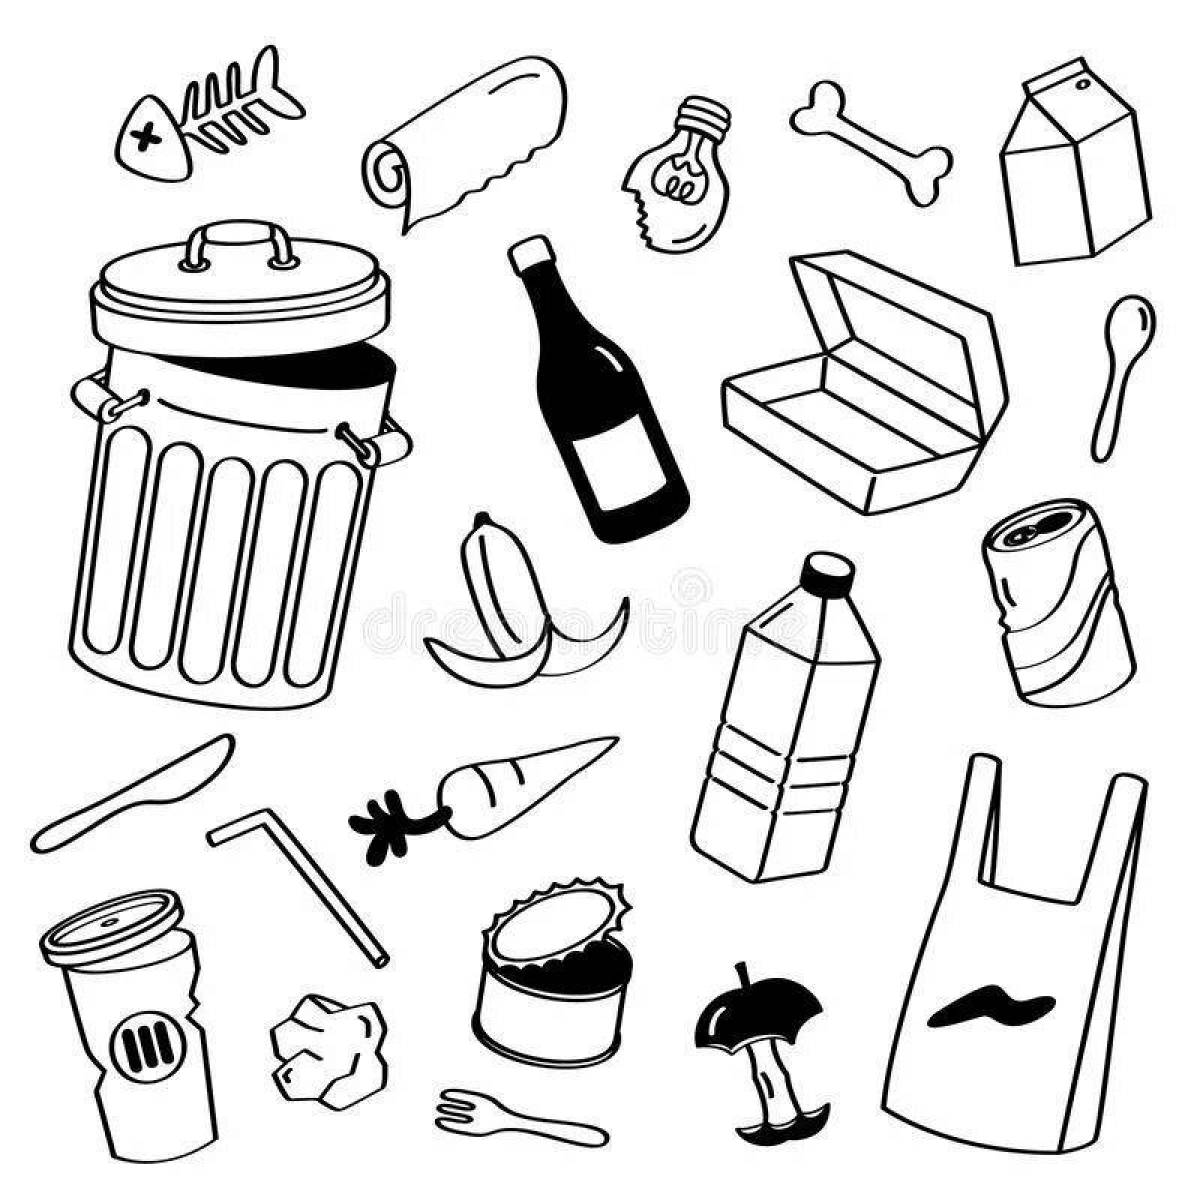 Amazing trash coloring page